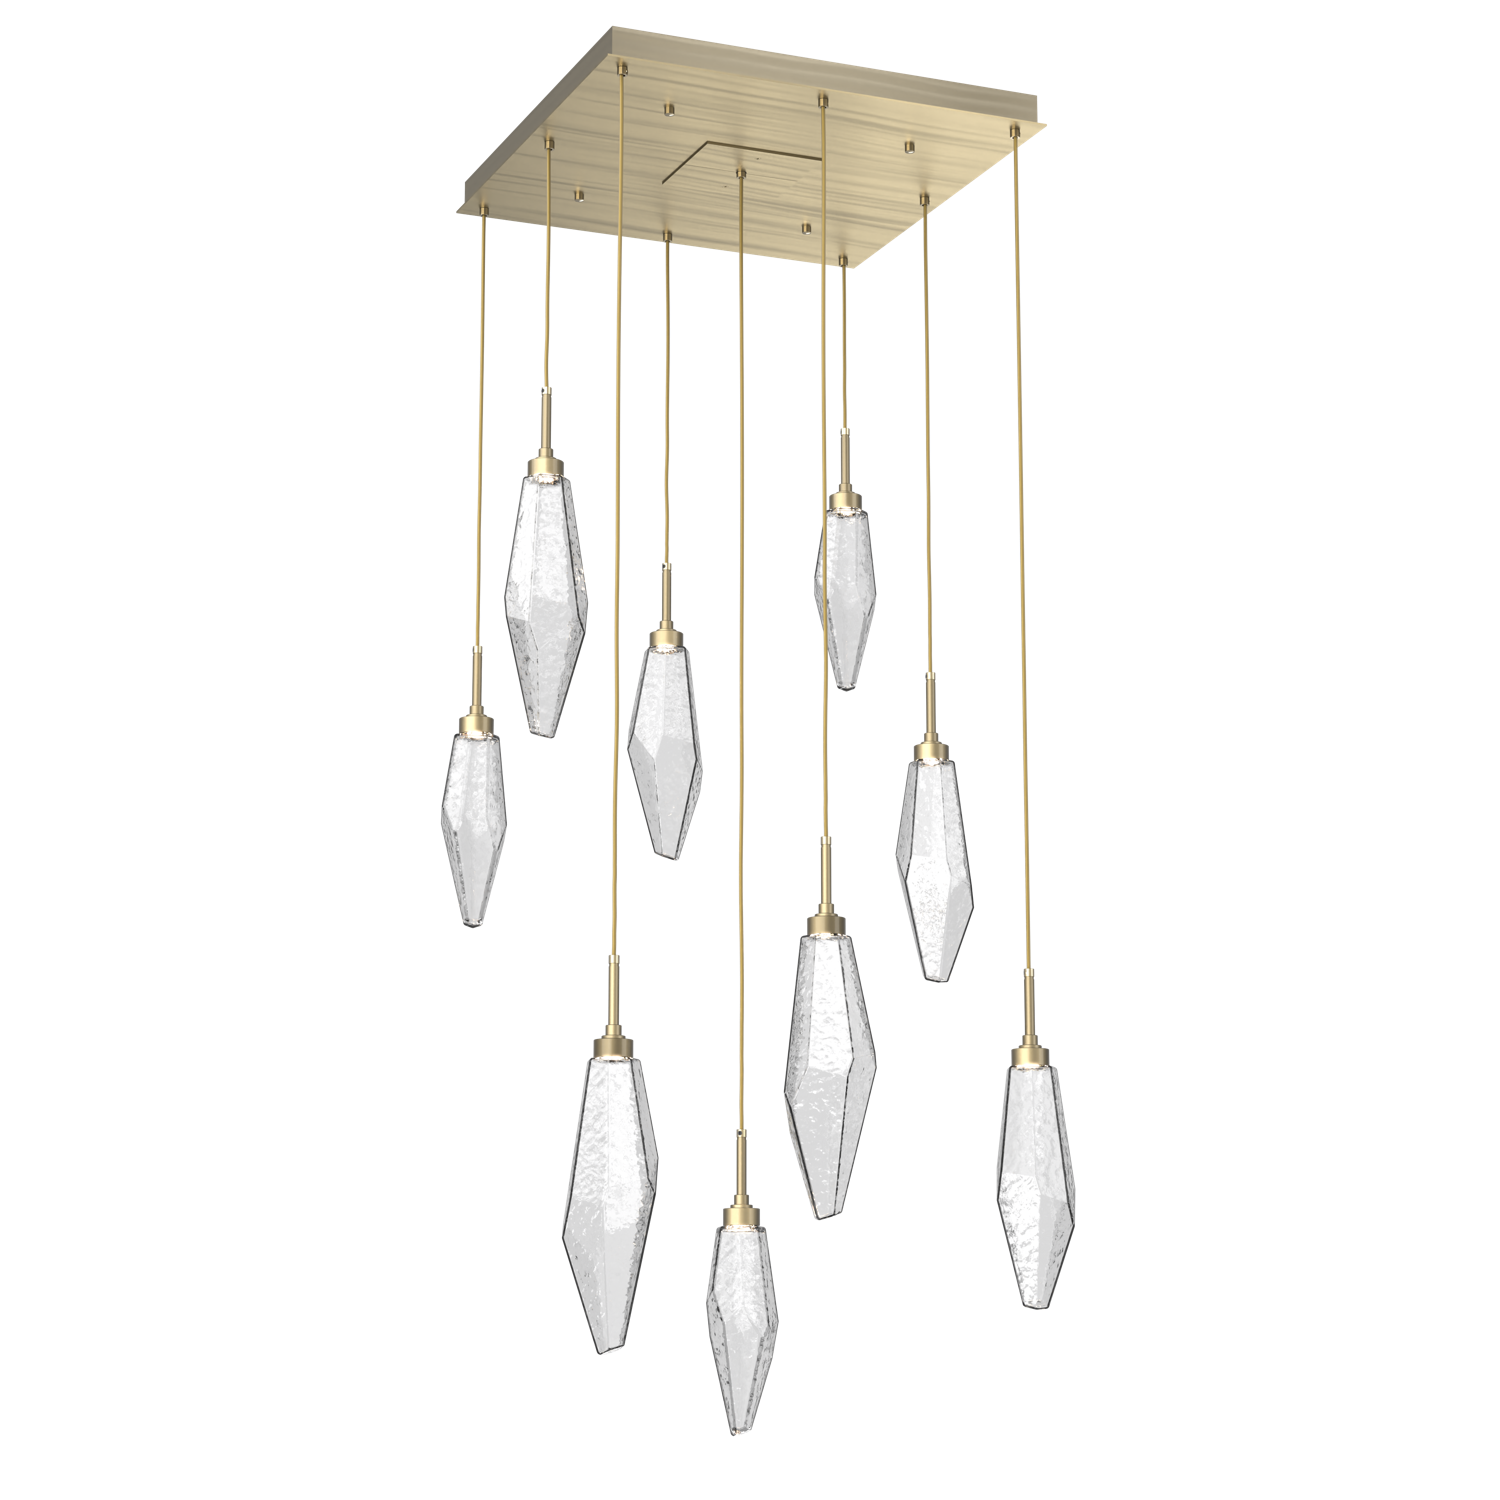 CHB0050-09-HB-CC-Hammerton-Studio-Rock-Crystal-9-light-square-pendant-chandelier-with-heritage-brass-finish-and-clear-glass-shades-and-LED-lamping